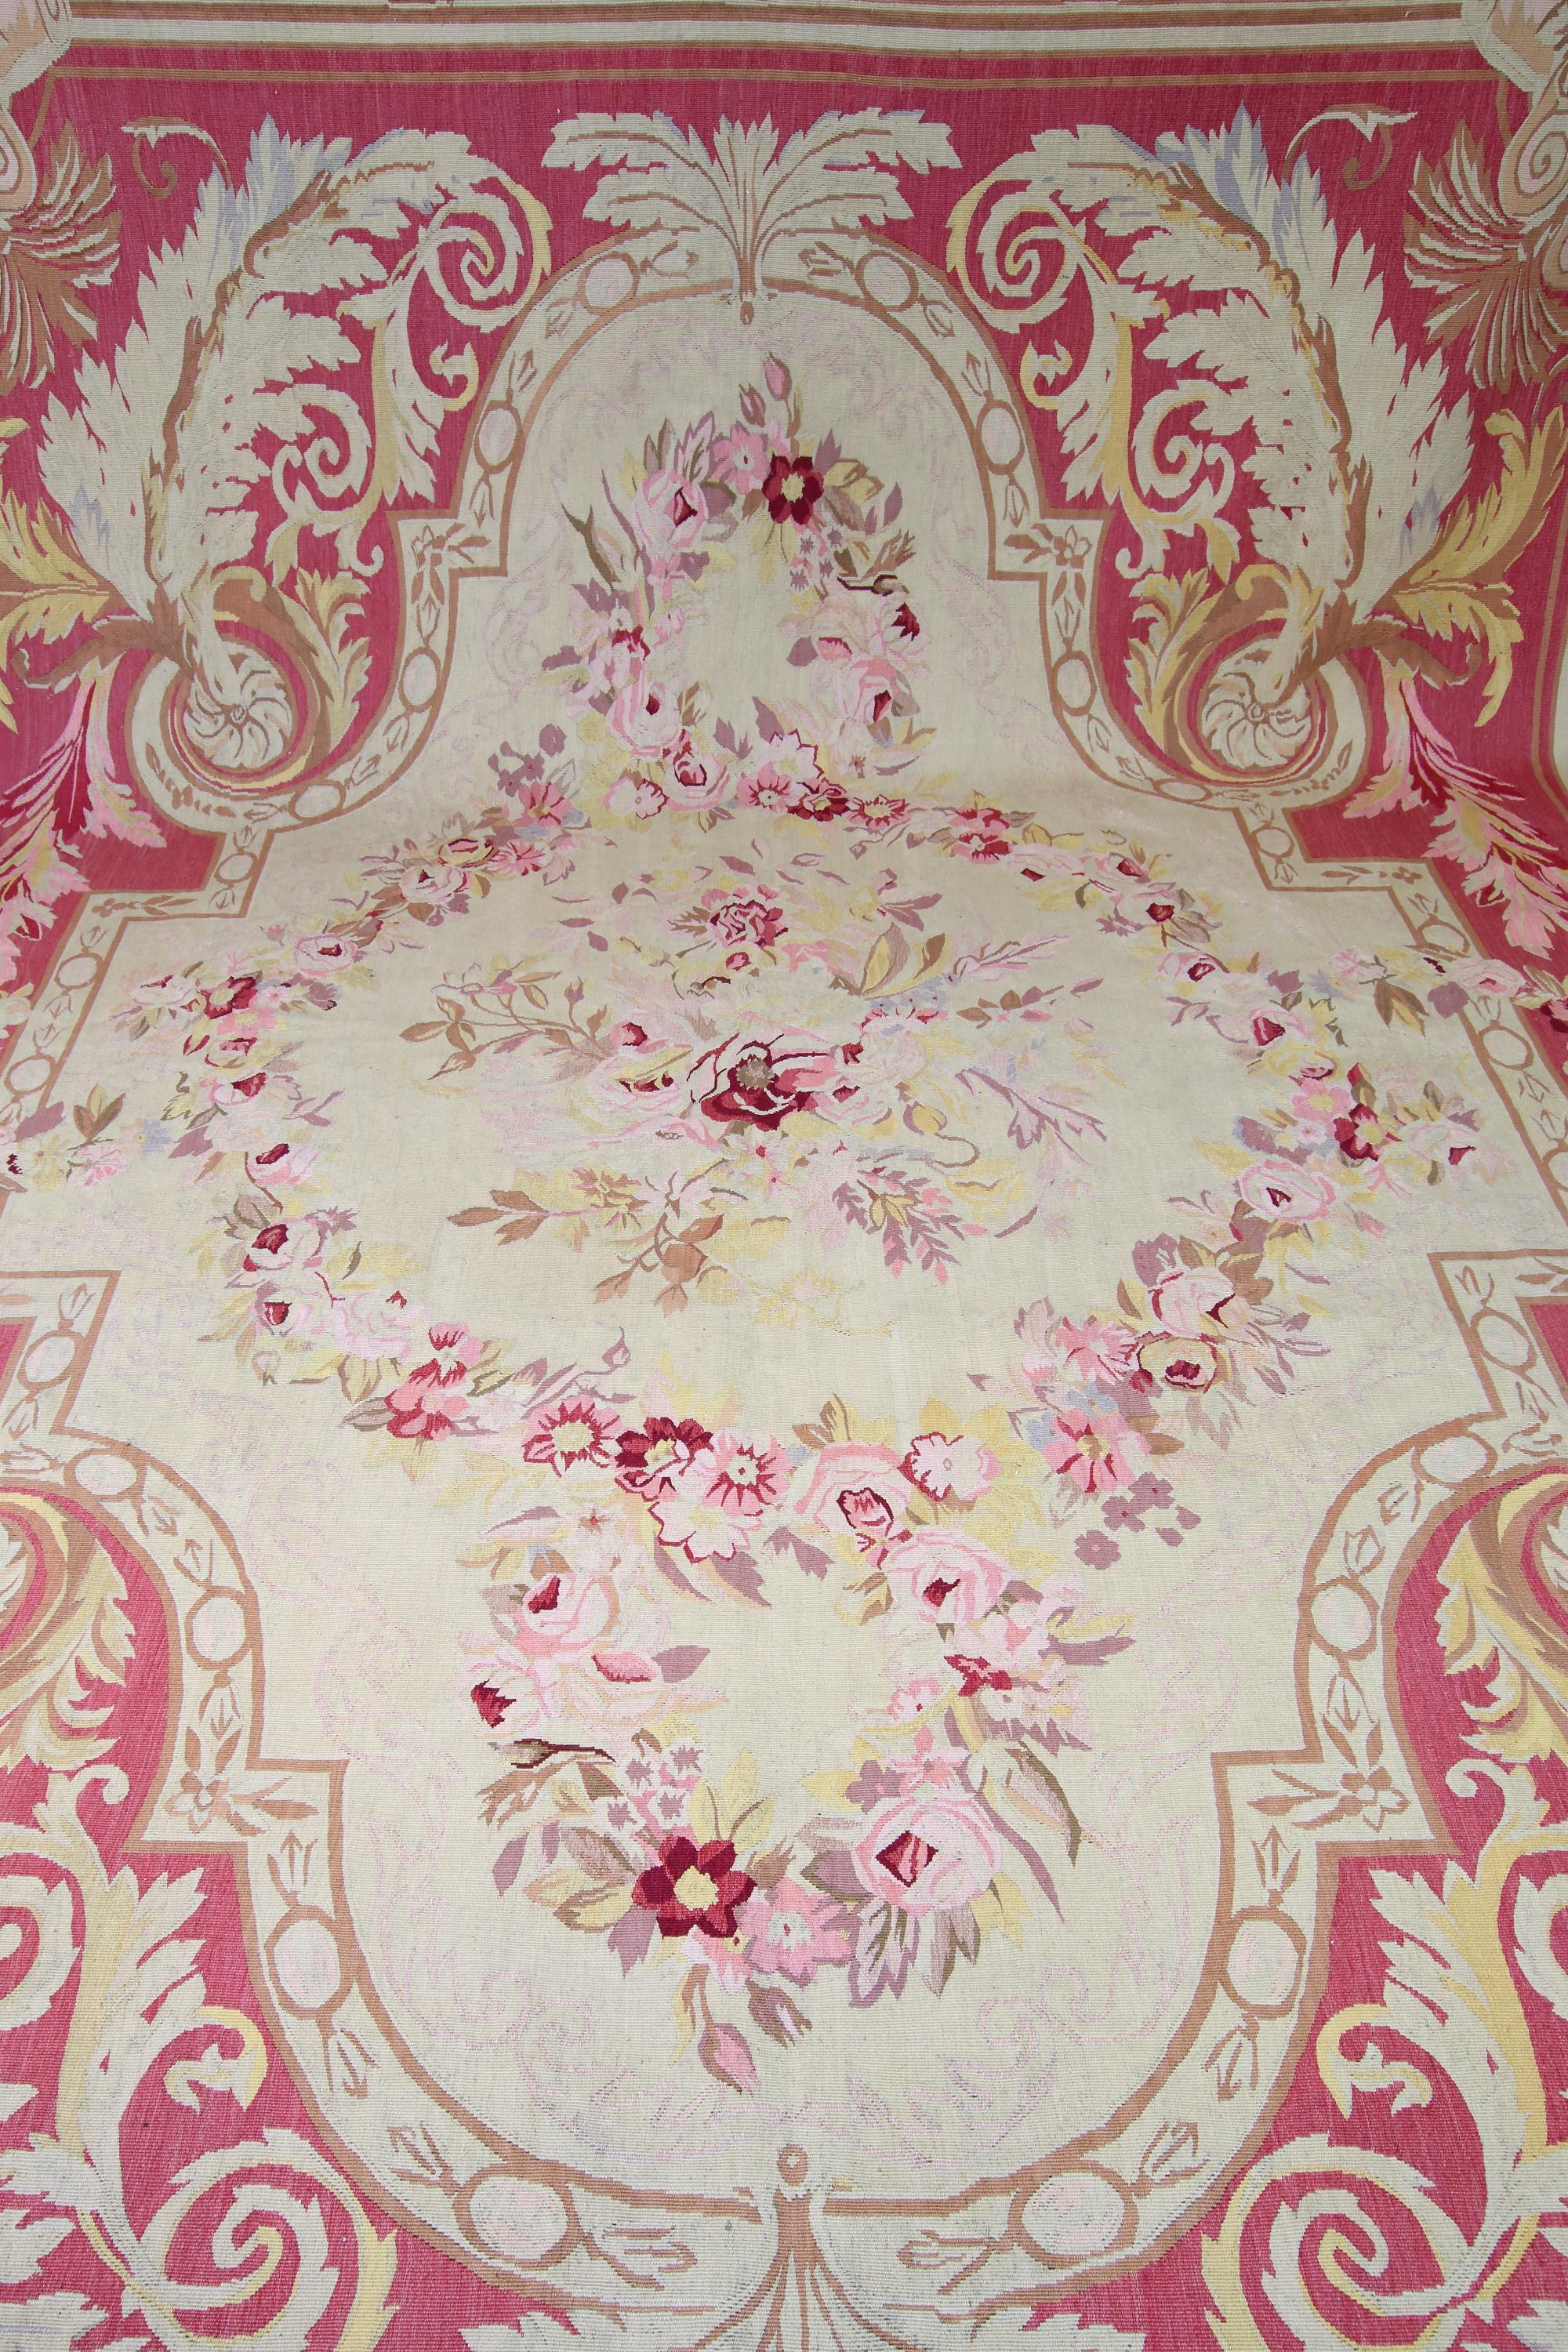 French/Paris Louis XVI rose colored Floral Aubusson carpet, circa 1900

Antique French tapestry-woven Louis XVI-style Aubusson carpet showing a large curvy cream-colored cartouche on a rose-colored ground. The cartouche enclosing a polychrome